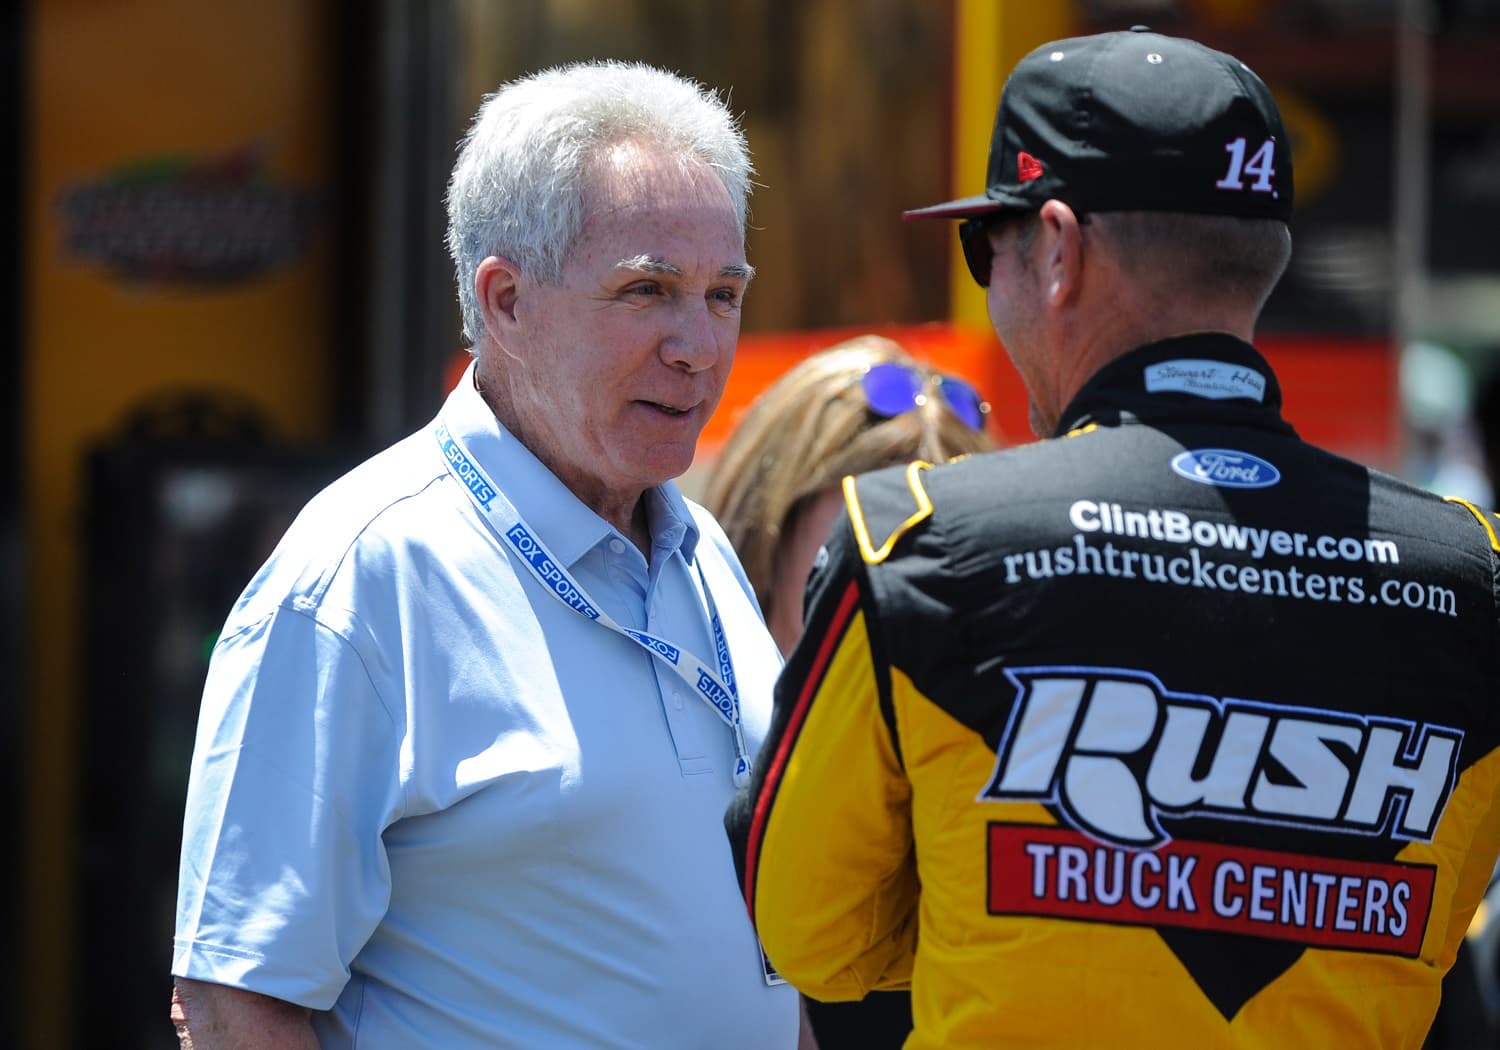 Fox Sports NASCAR Announcer Darrell Waltrip speaks with Clint Bowyer during the NASCAR Cup Series practice for the Toyota/Save Mart 350 on June 21, 2019. | Samuel Stringer/Icon Sportswire via Getty Images